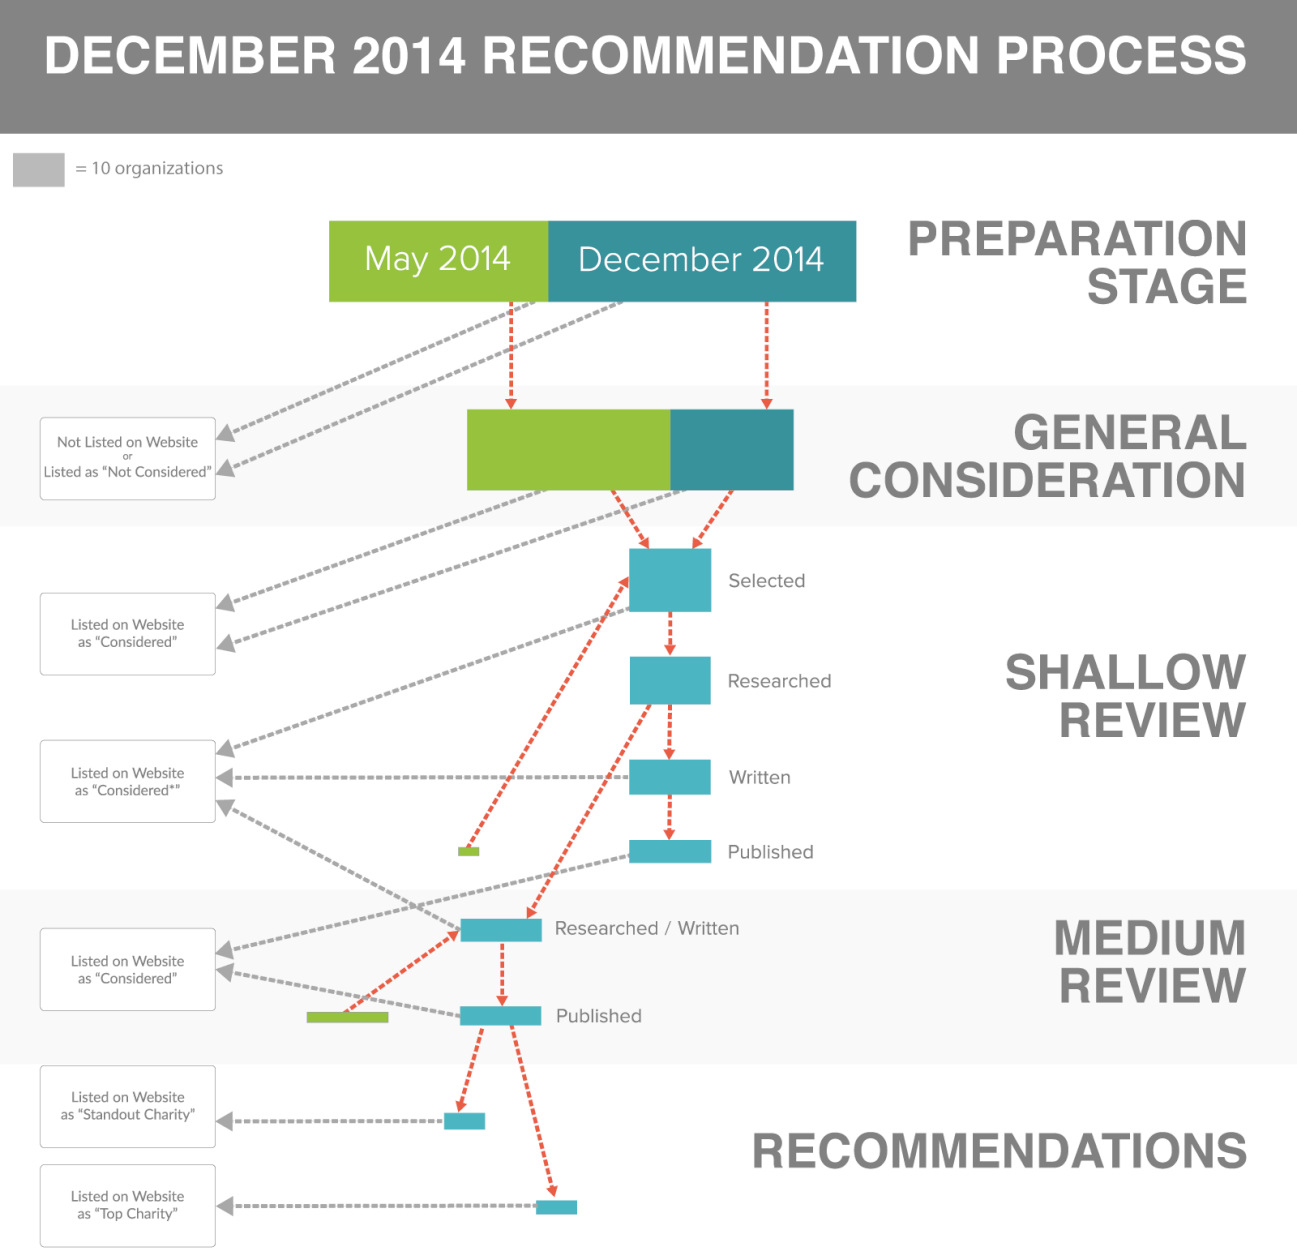 December 2014 Recommendation Process